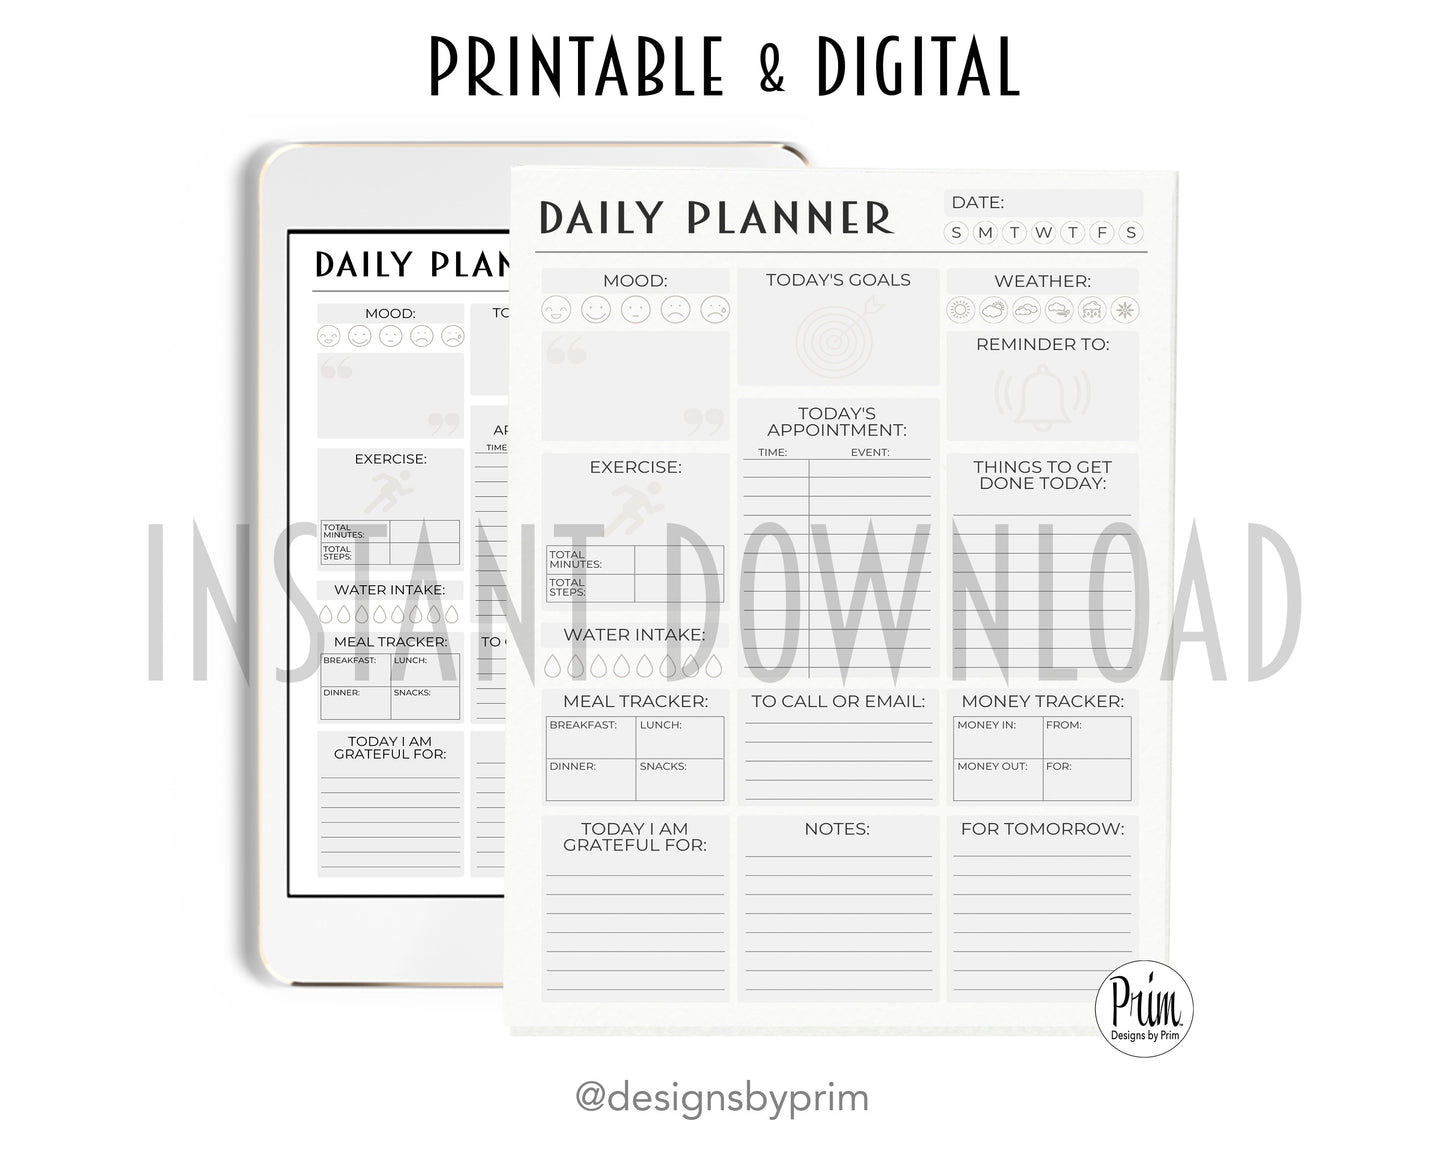 Designs by Prim Daily Planner Undated Gray | Mood Tracker Fitness Exercise Water Intake Meal Tracker Goals Appointments Weather Reminder Money Tracker